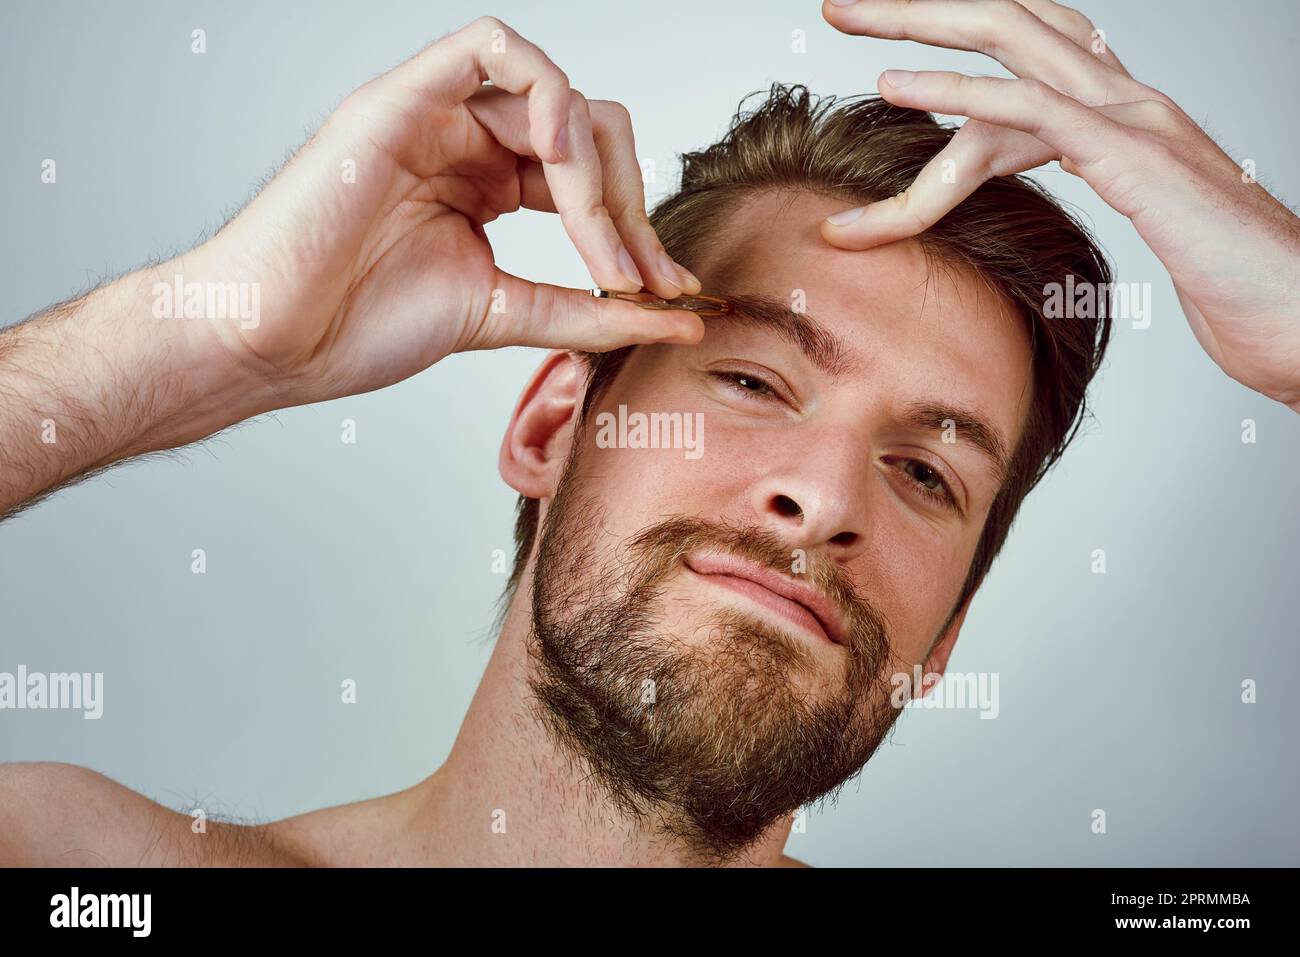 Be the boss of your brows. Studio shot of a handsome young man plucking his eyebrows against a gray background. Stock Photo